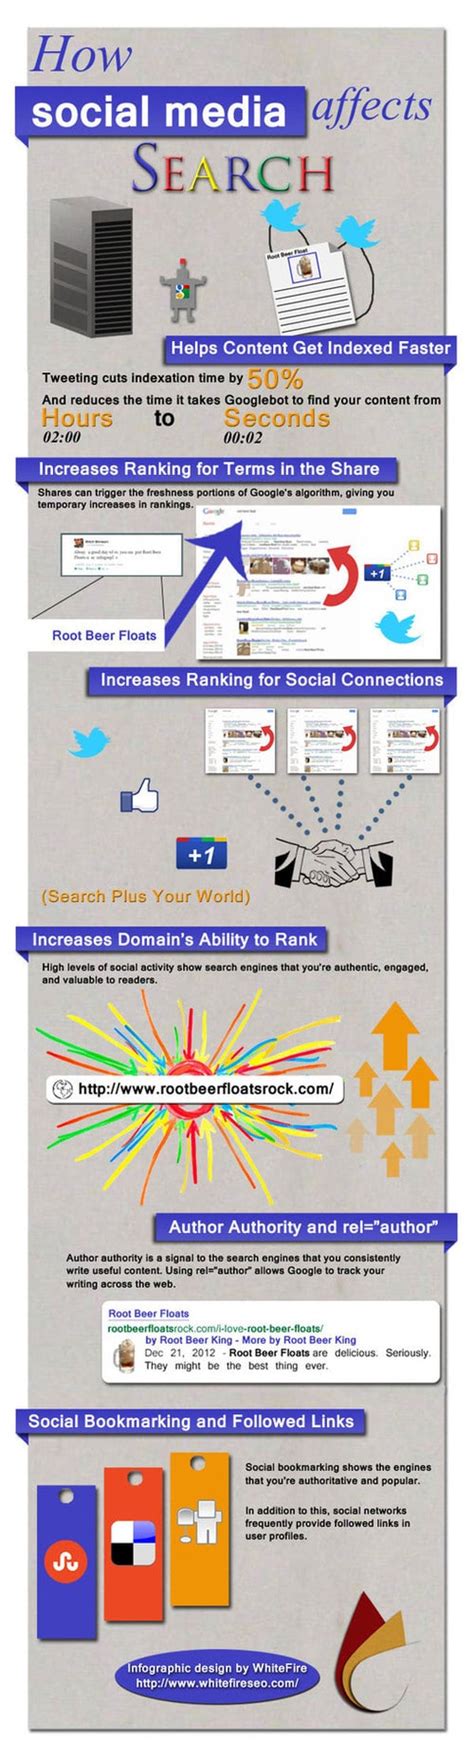 social media efforts affect search ranking infographic bit